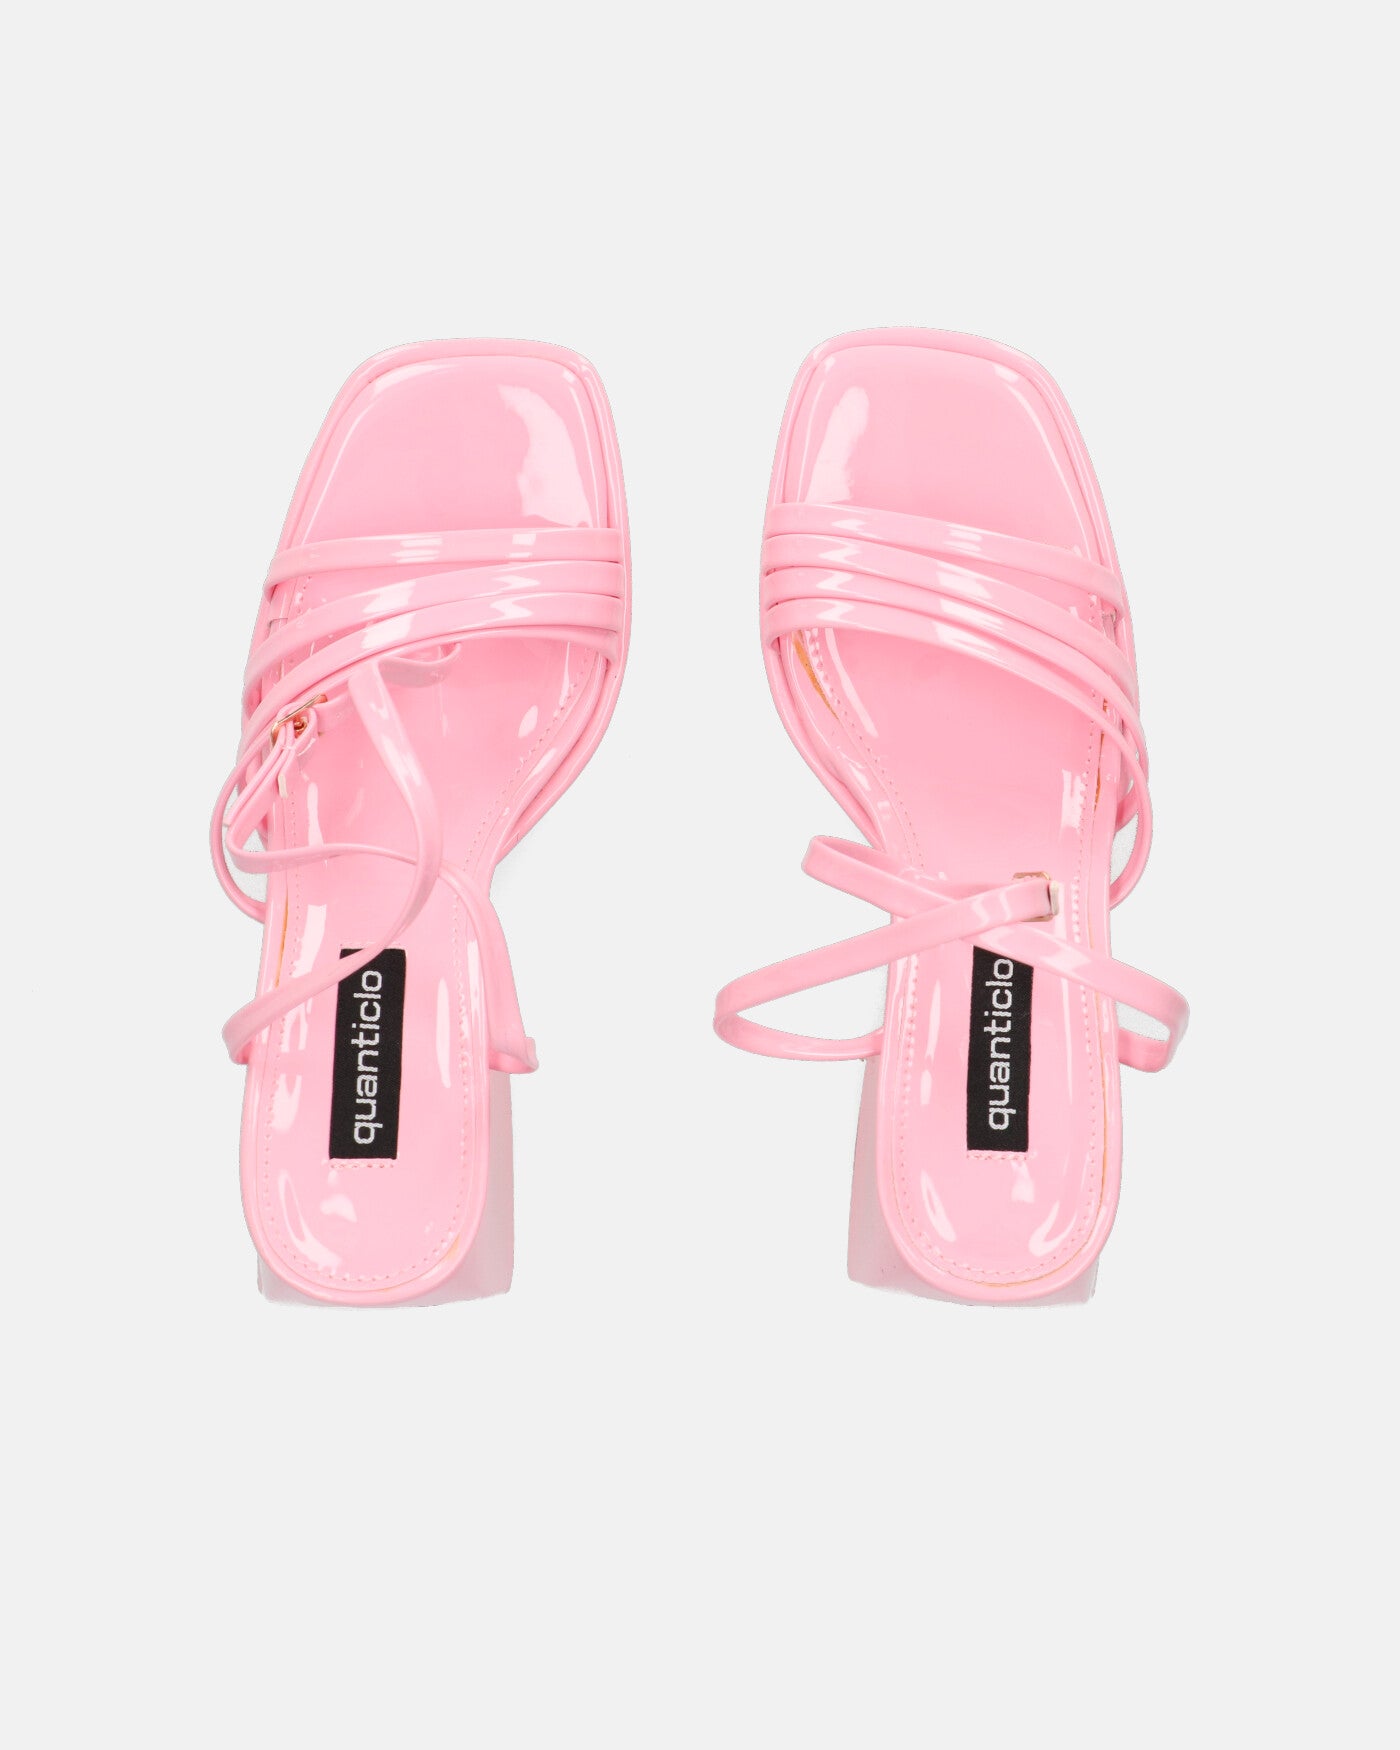 WINONA - pink glassy sandals with squared heel